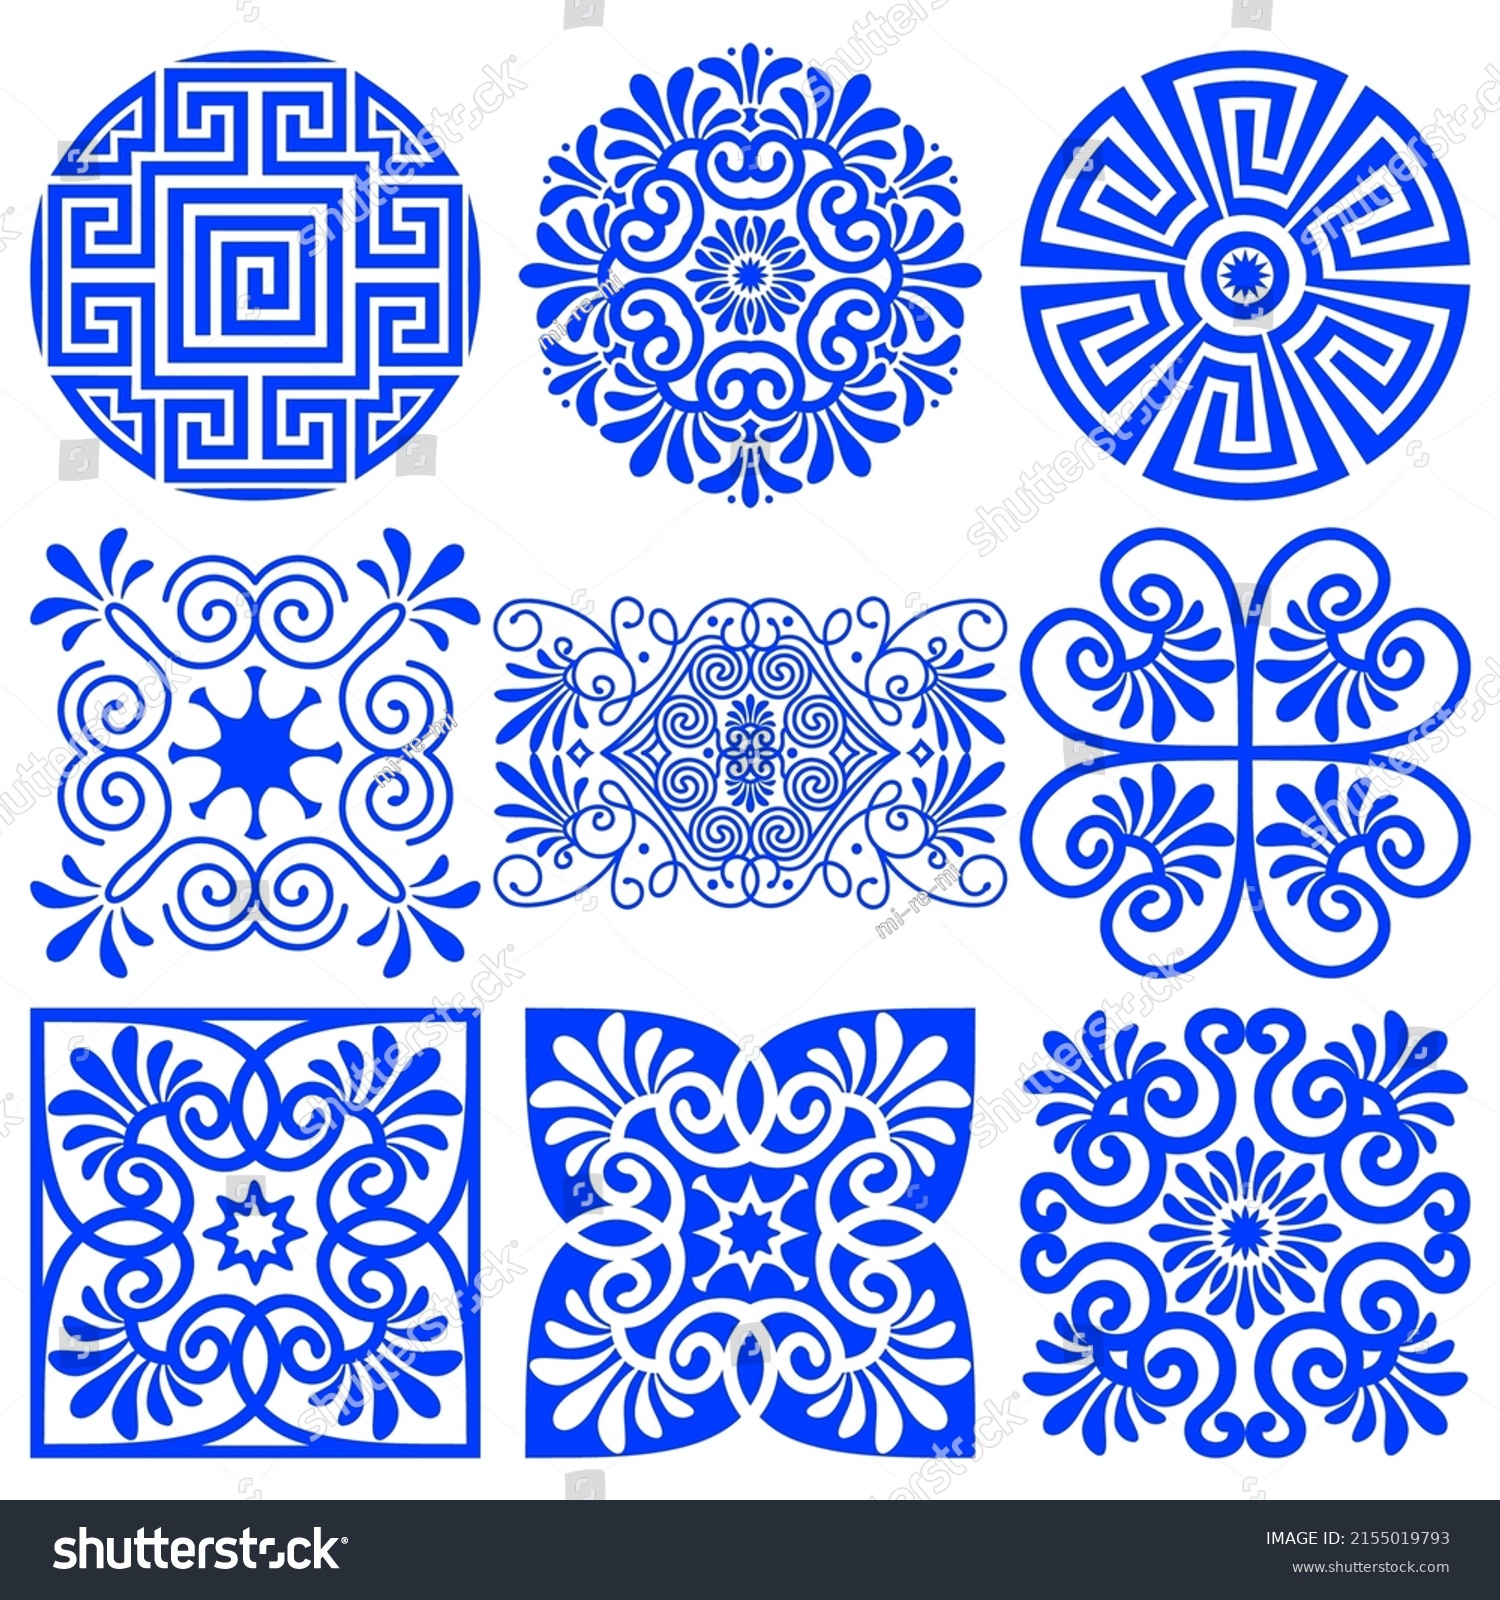 Collection of vector round, square ornaments in traditional Greek style. Ethnic mediterranean blue patterns isolated on white background. For the design of logos, plates, vignettes, printing on paper #2155019793